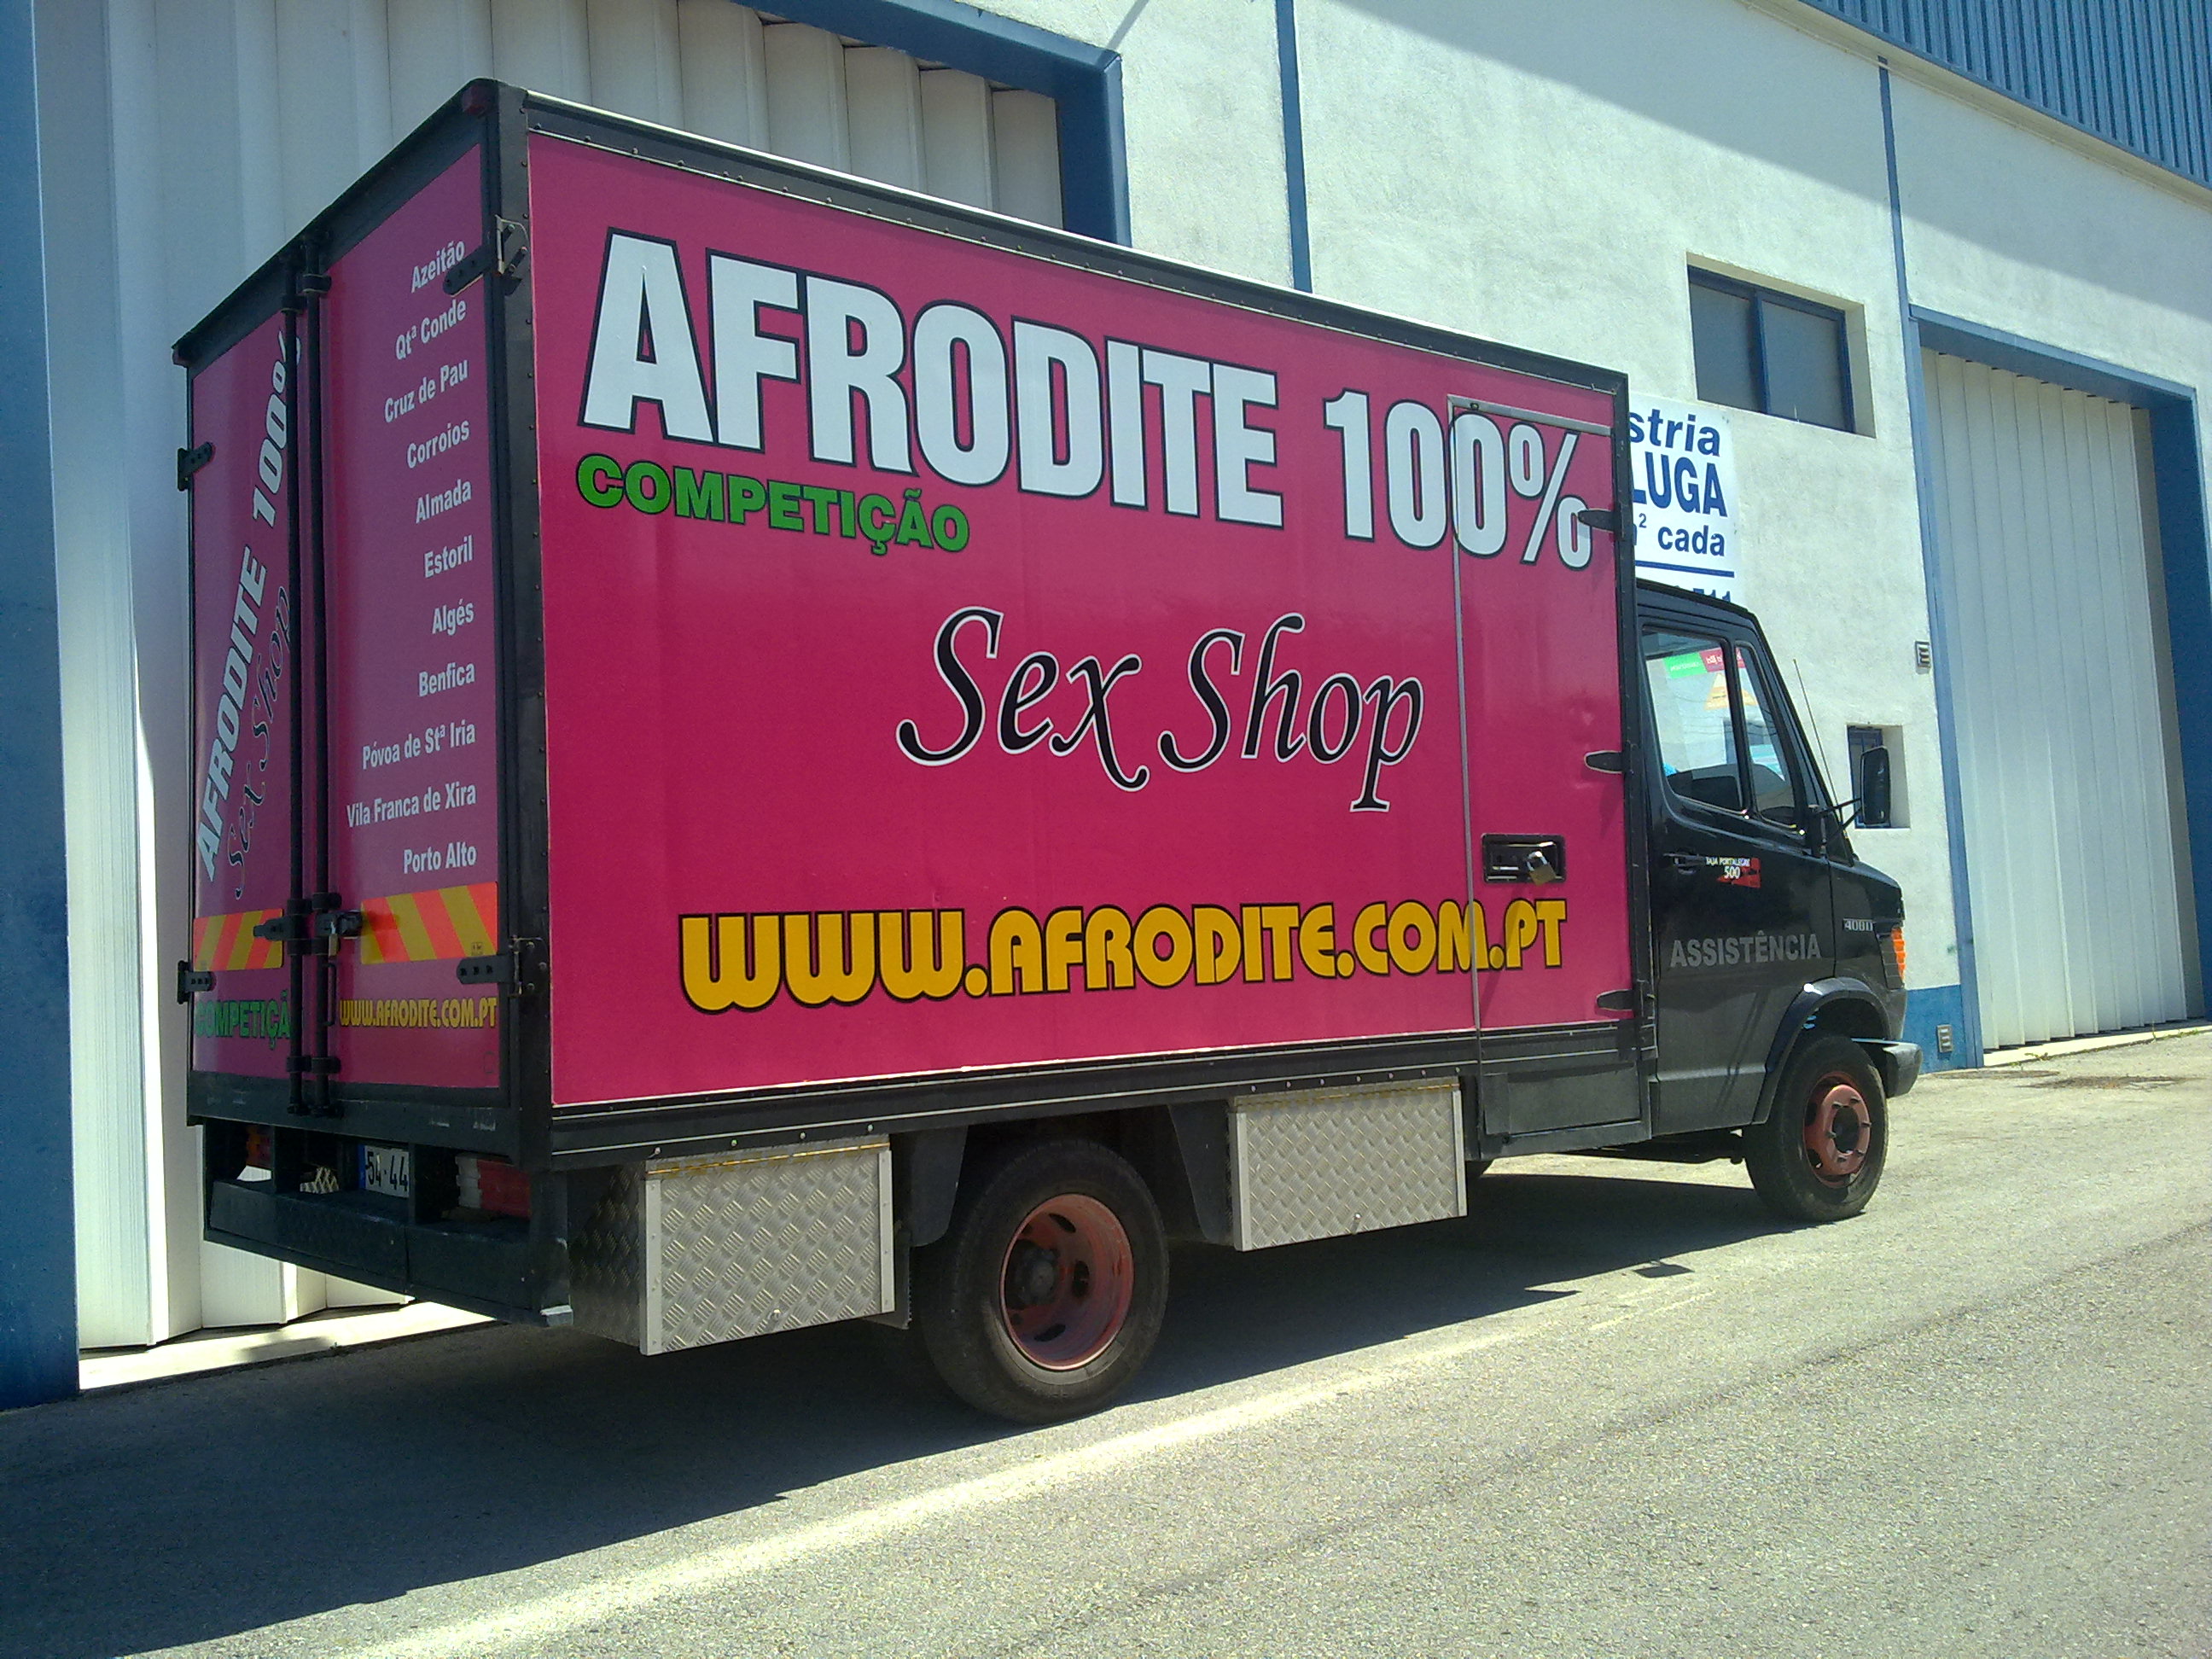 afrodite-competition.jpg